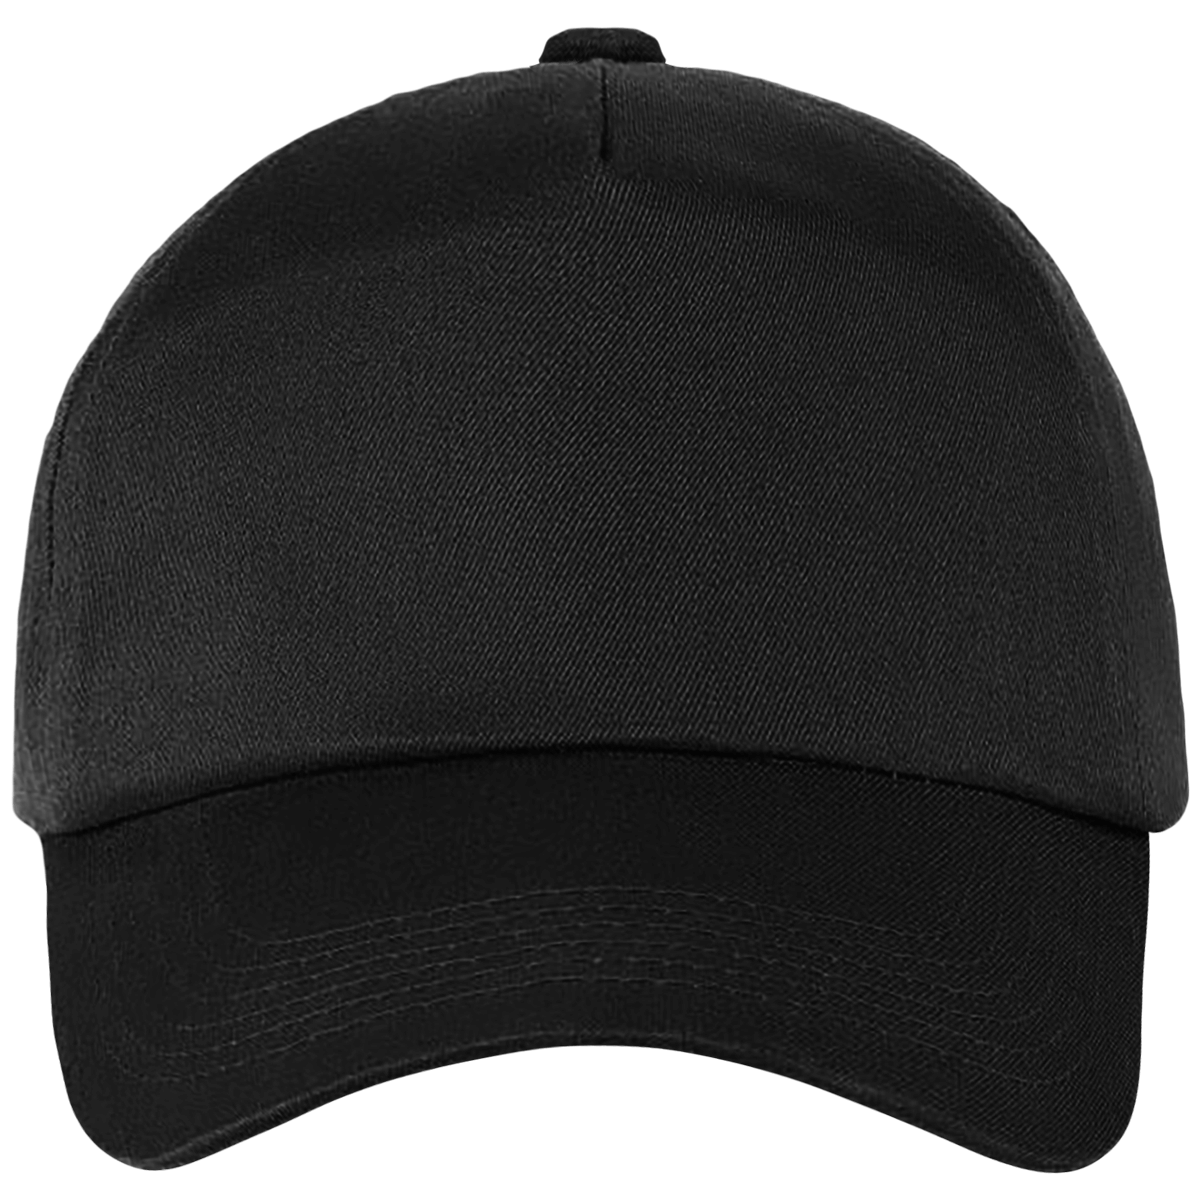 Customizable Fashion Cap In Embroidery And Printing Black